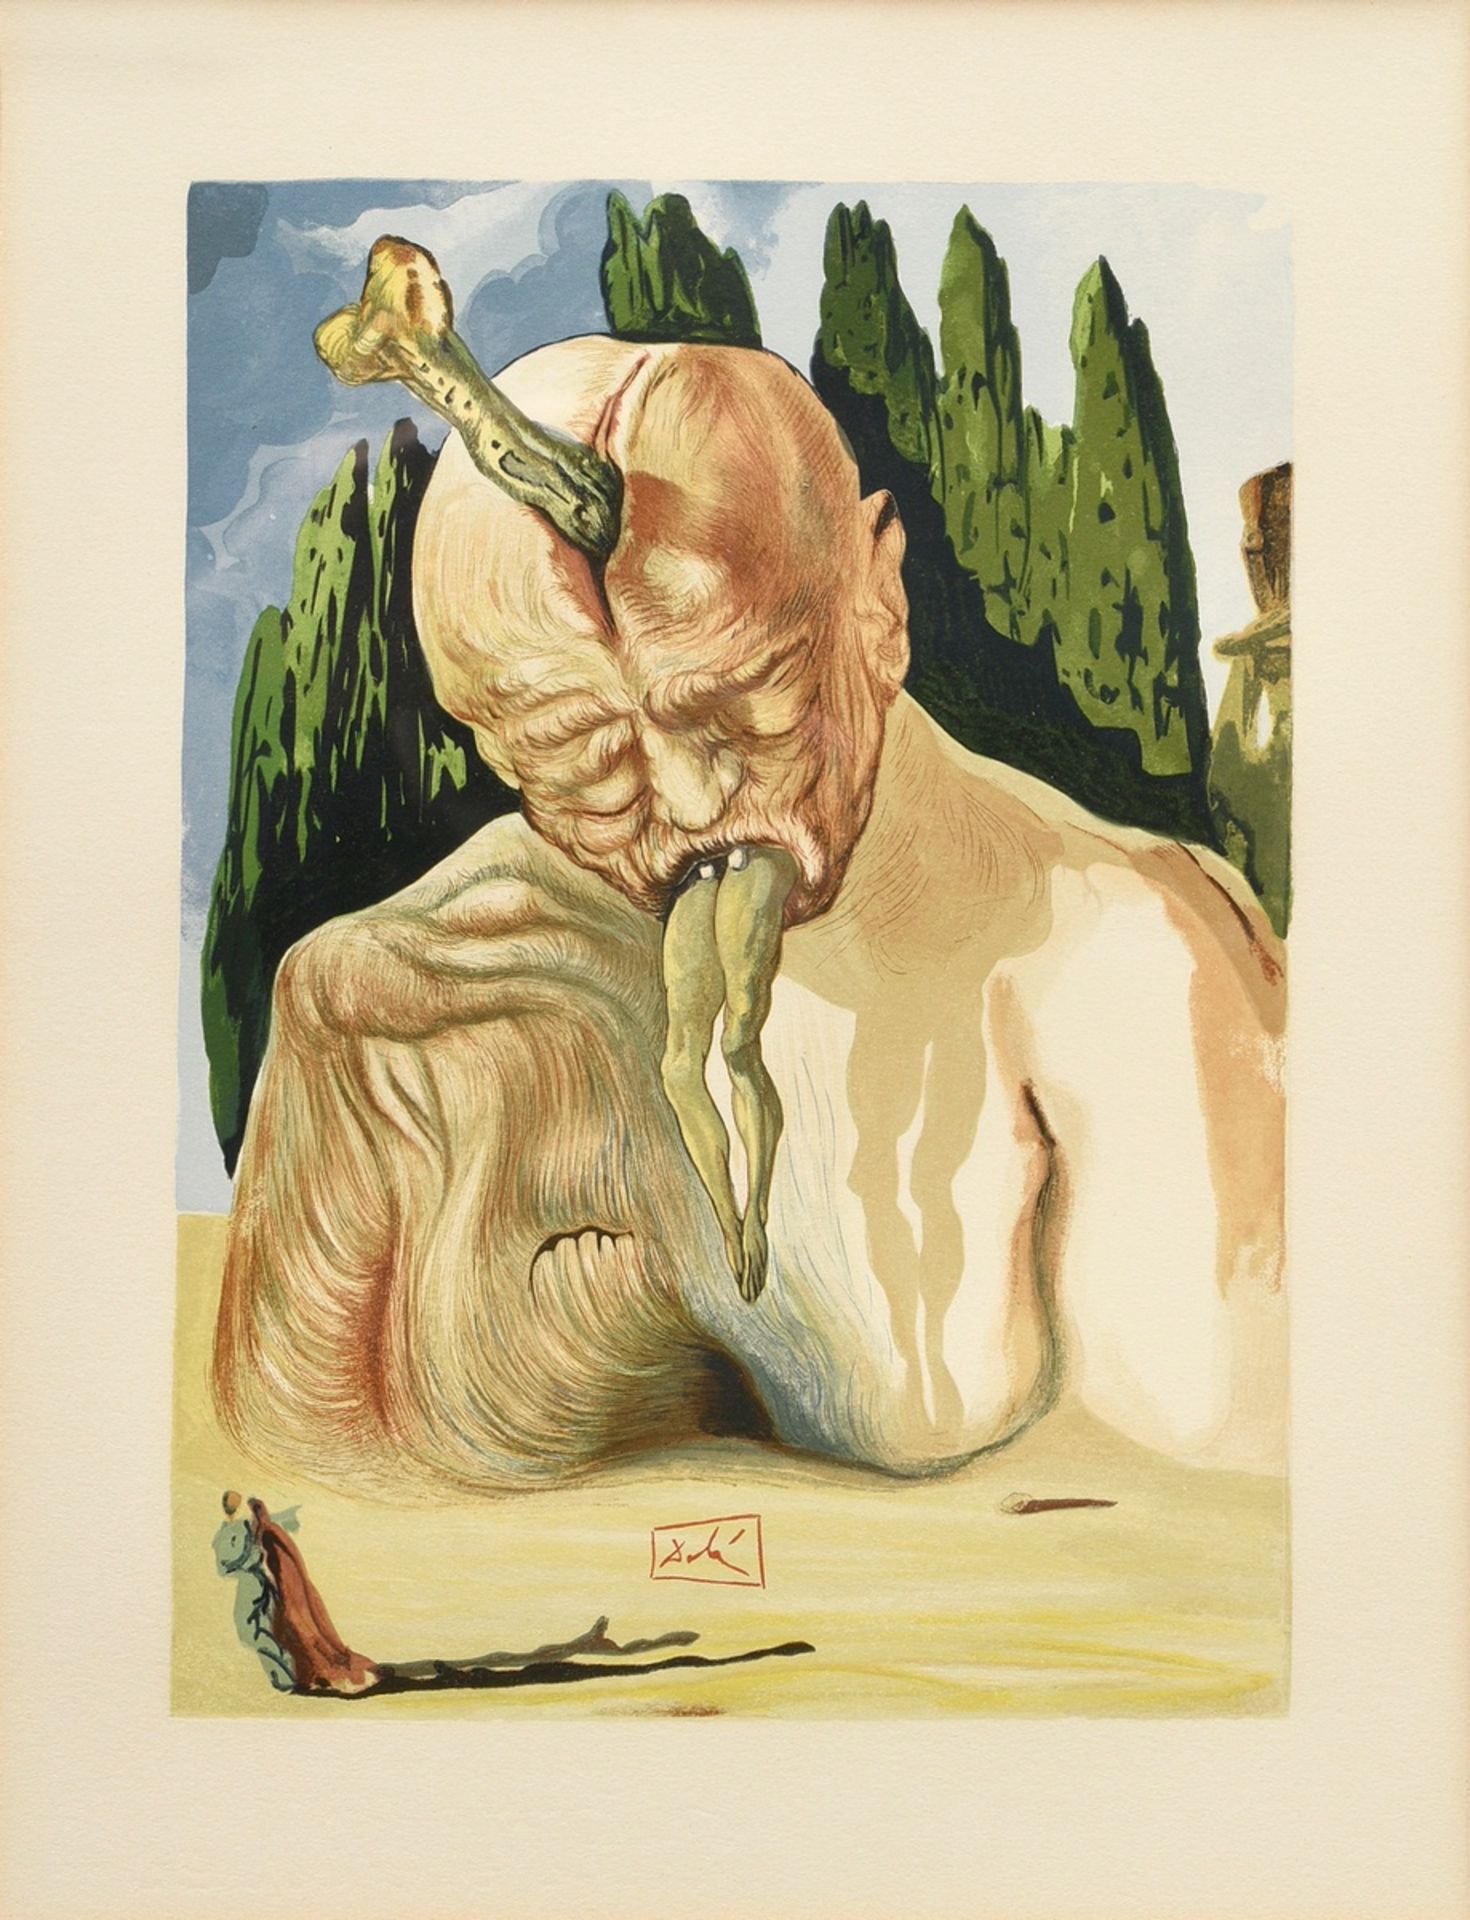 Dalí, Salvador (1904-1989) "The Logical Devil" (Hell - 27th canto), from Dante Alighieri "The Divin